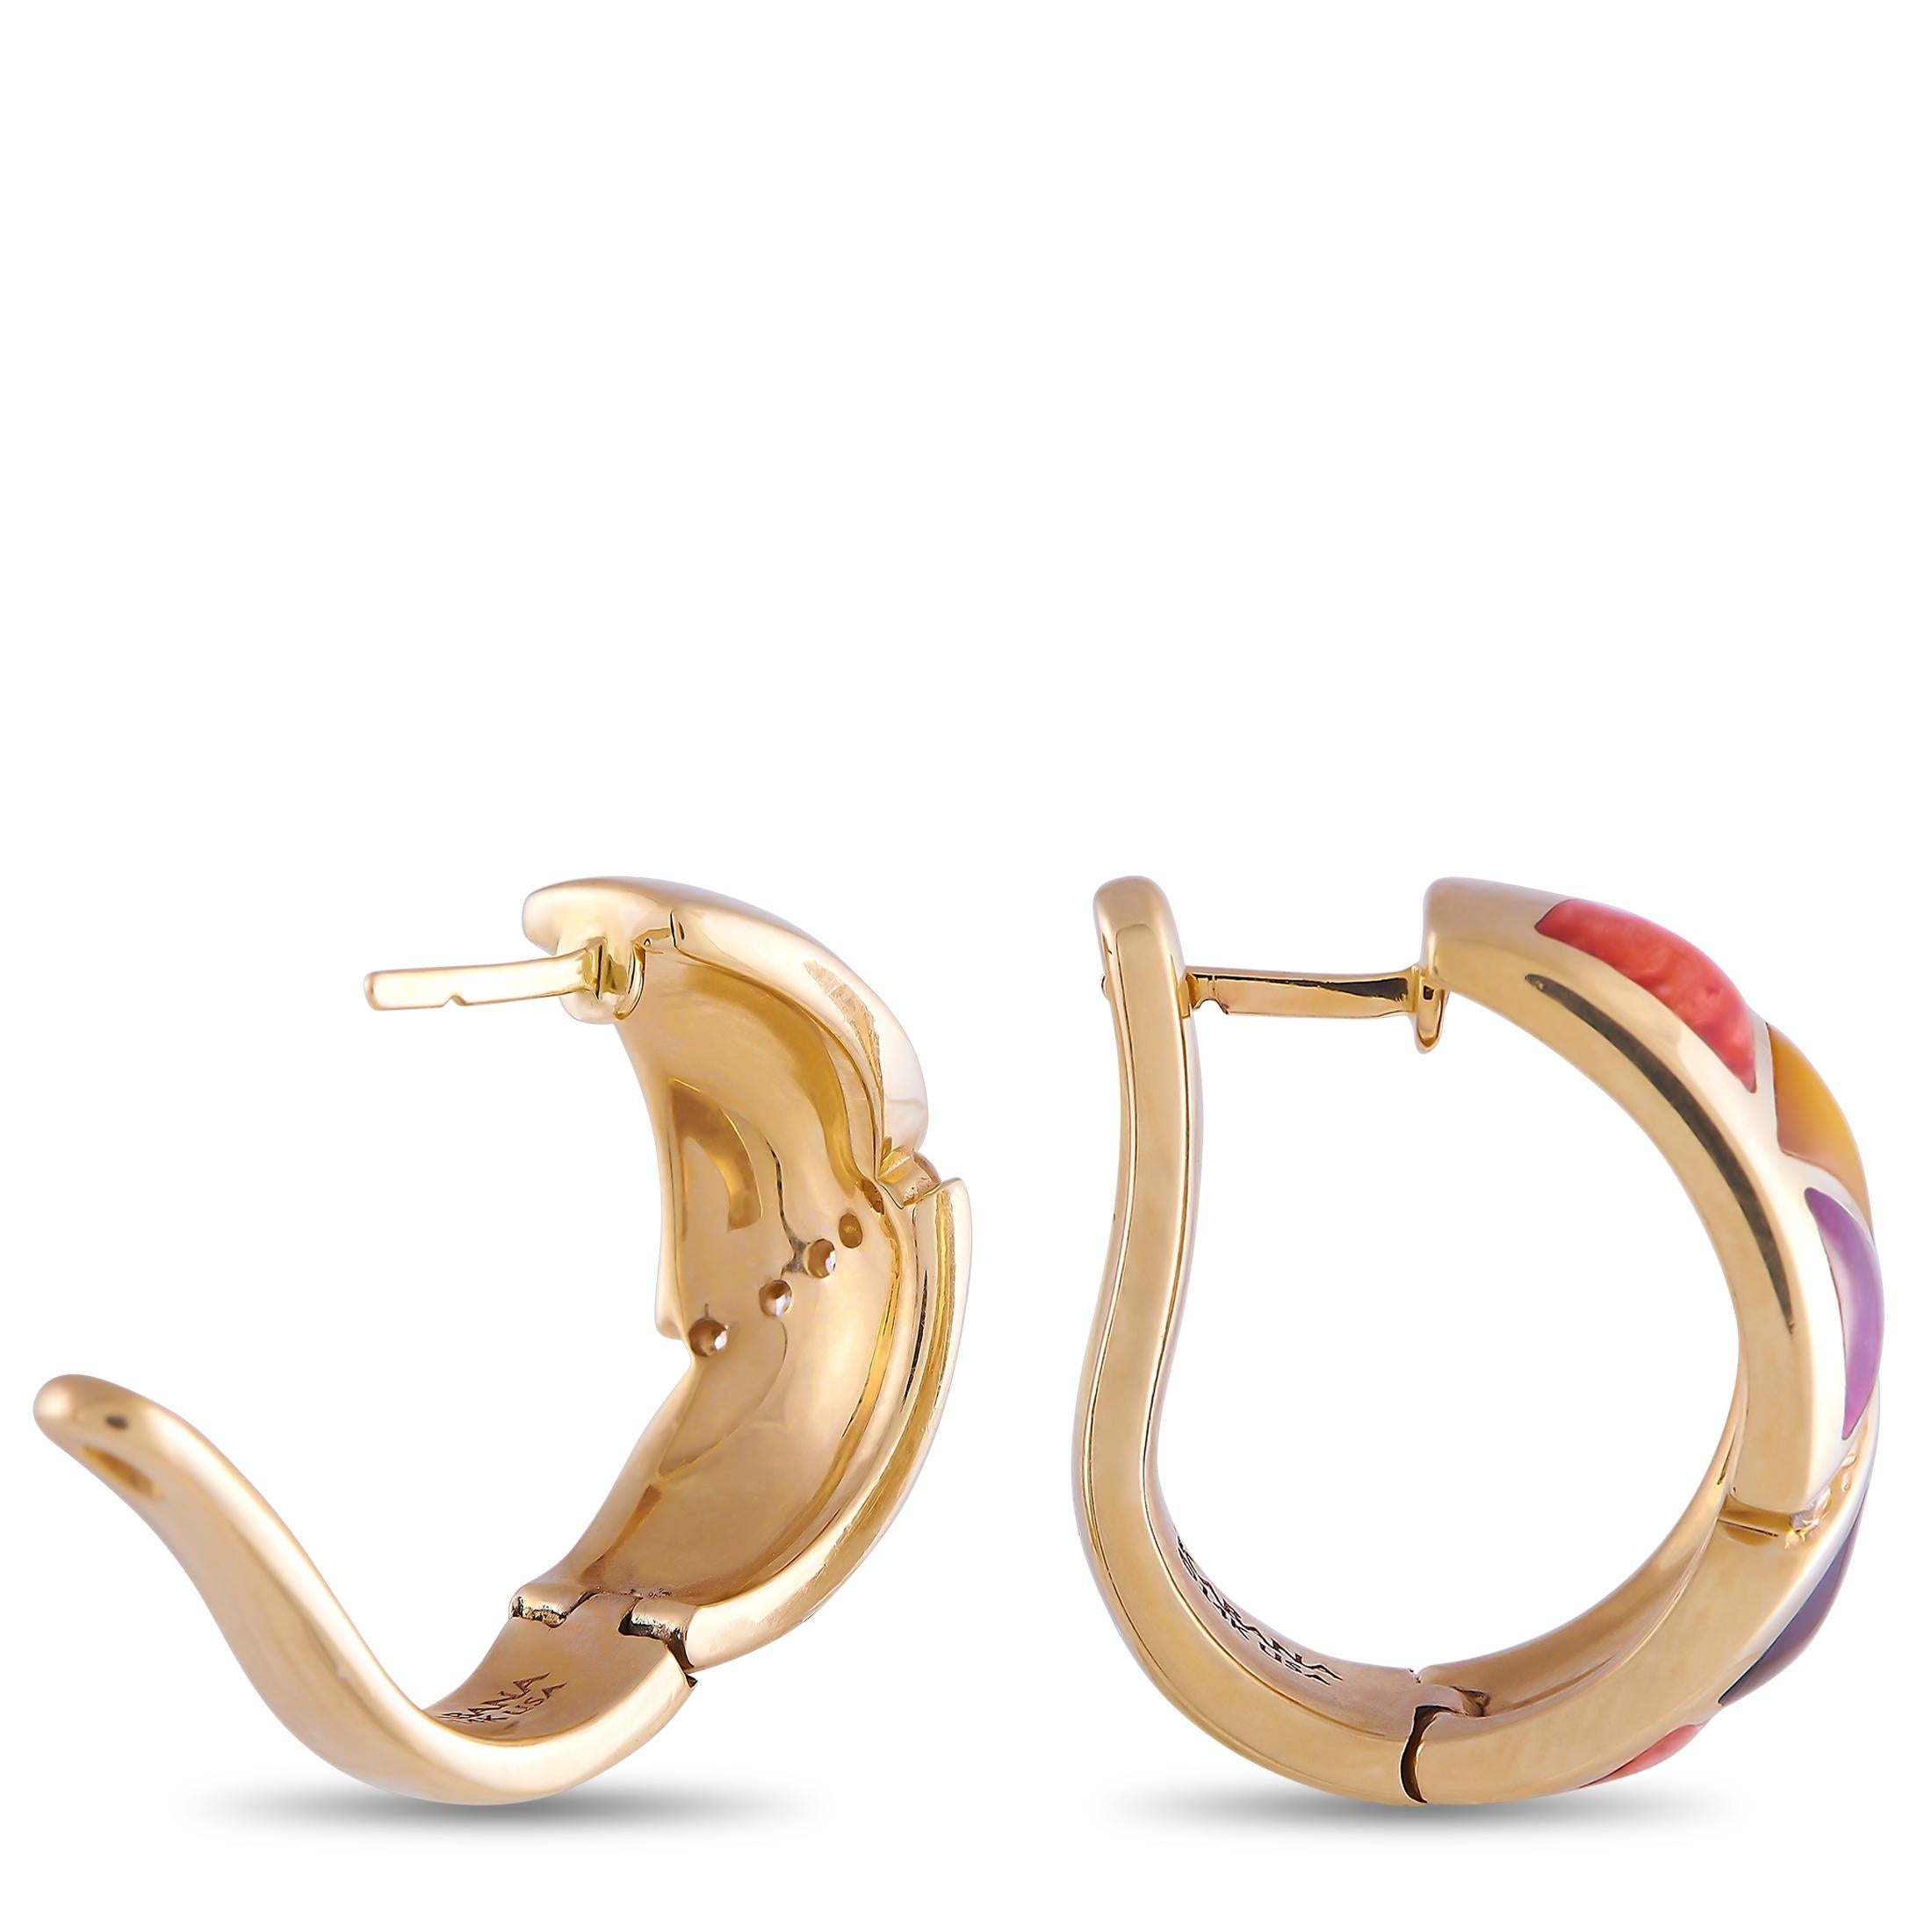 These beautiful Kabana earrings are the perfect finishing touch. The earrings are made with 14K yellow gold and inlaid with Mother of Pearl and Spiny in an assortment of warm colors around the outside of the hoop. Each earring is set with a single